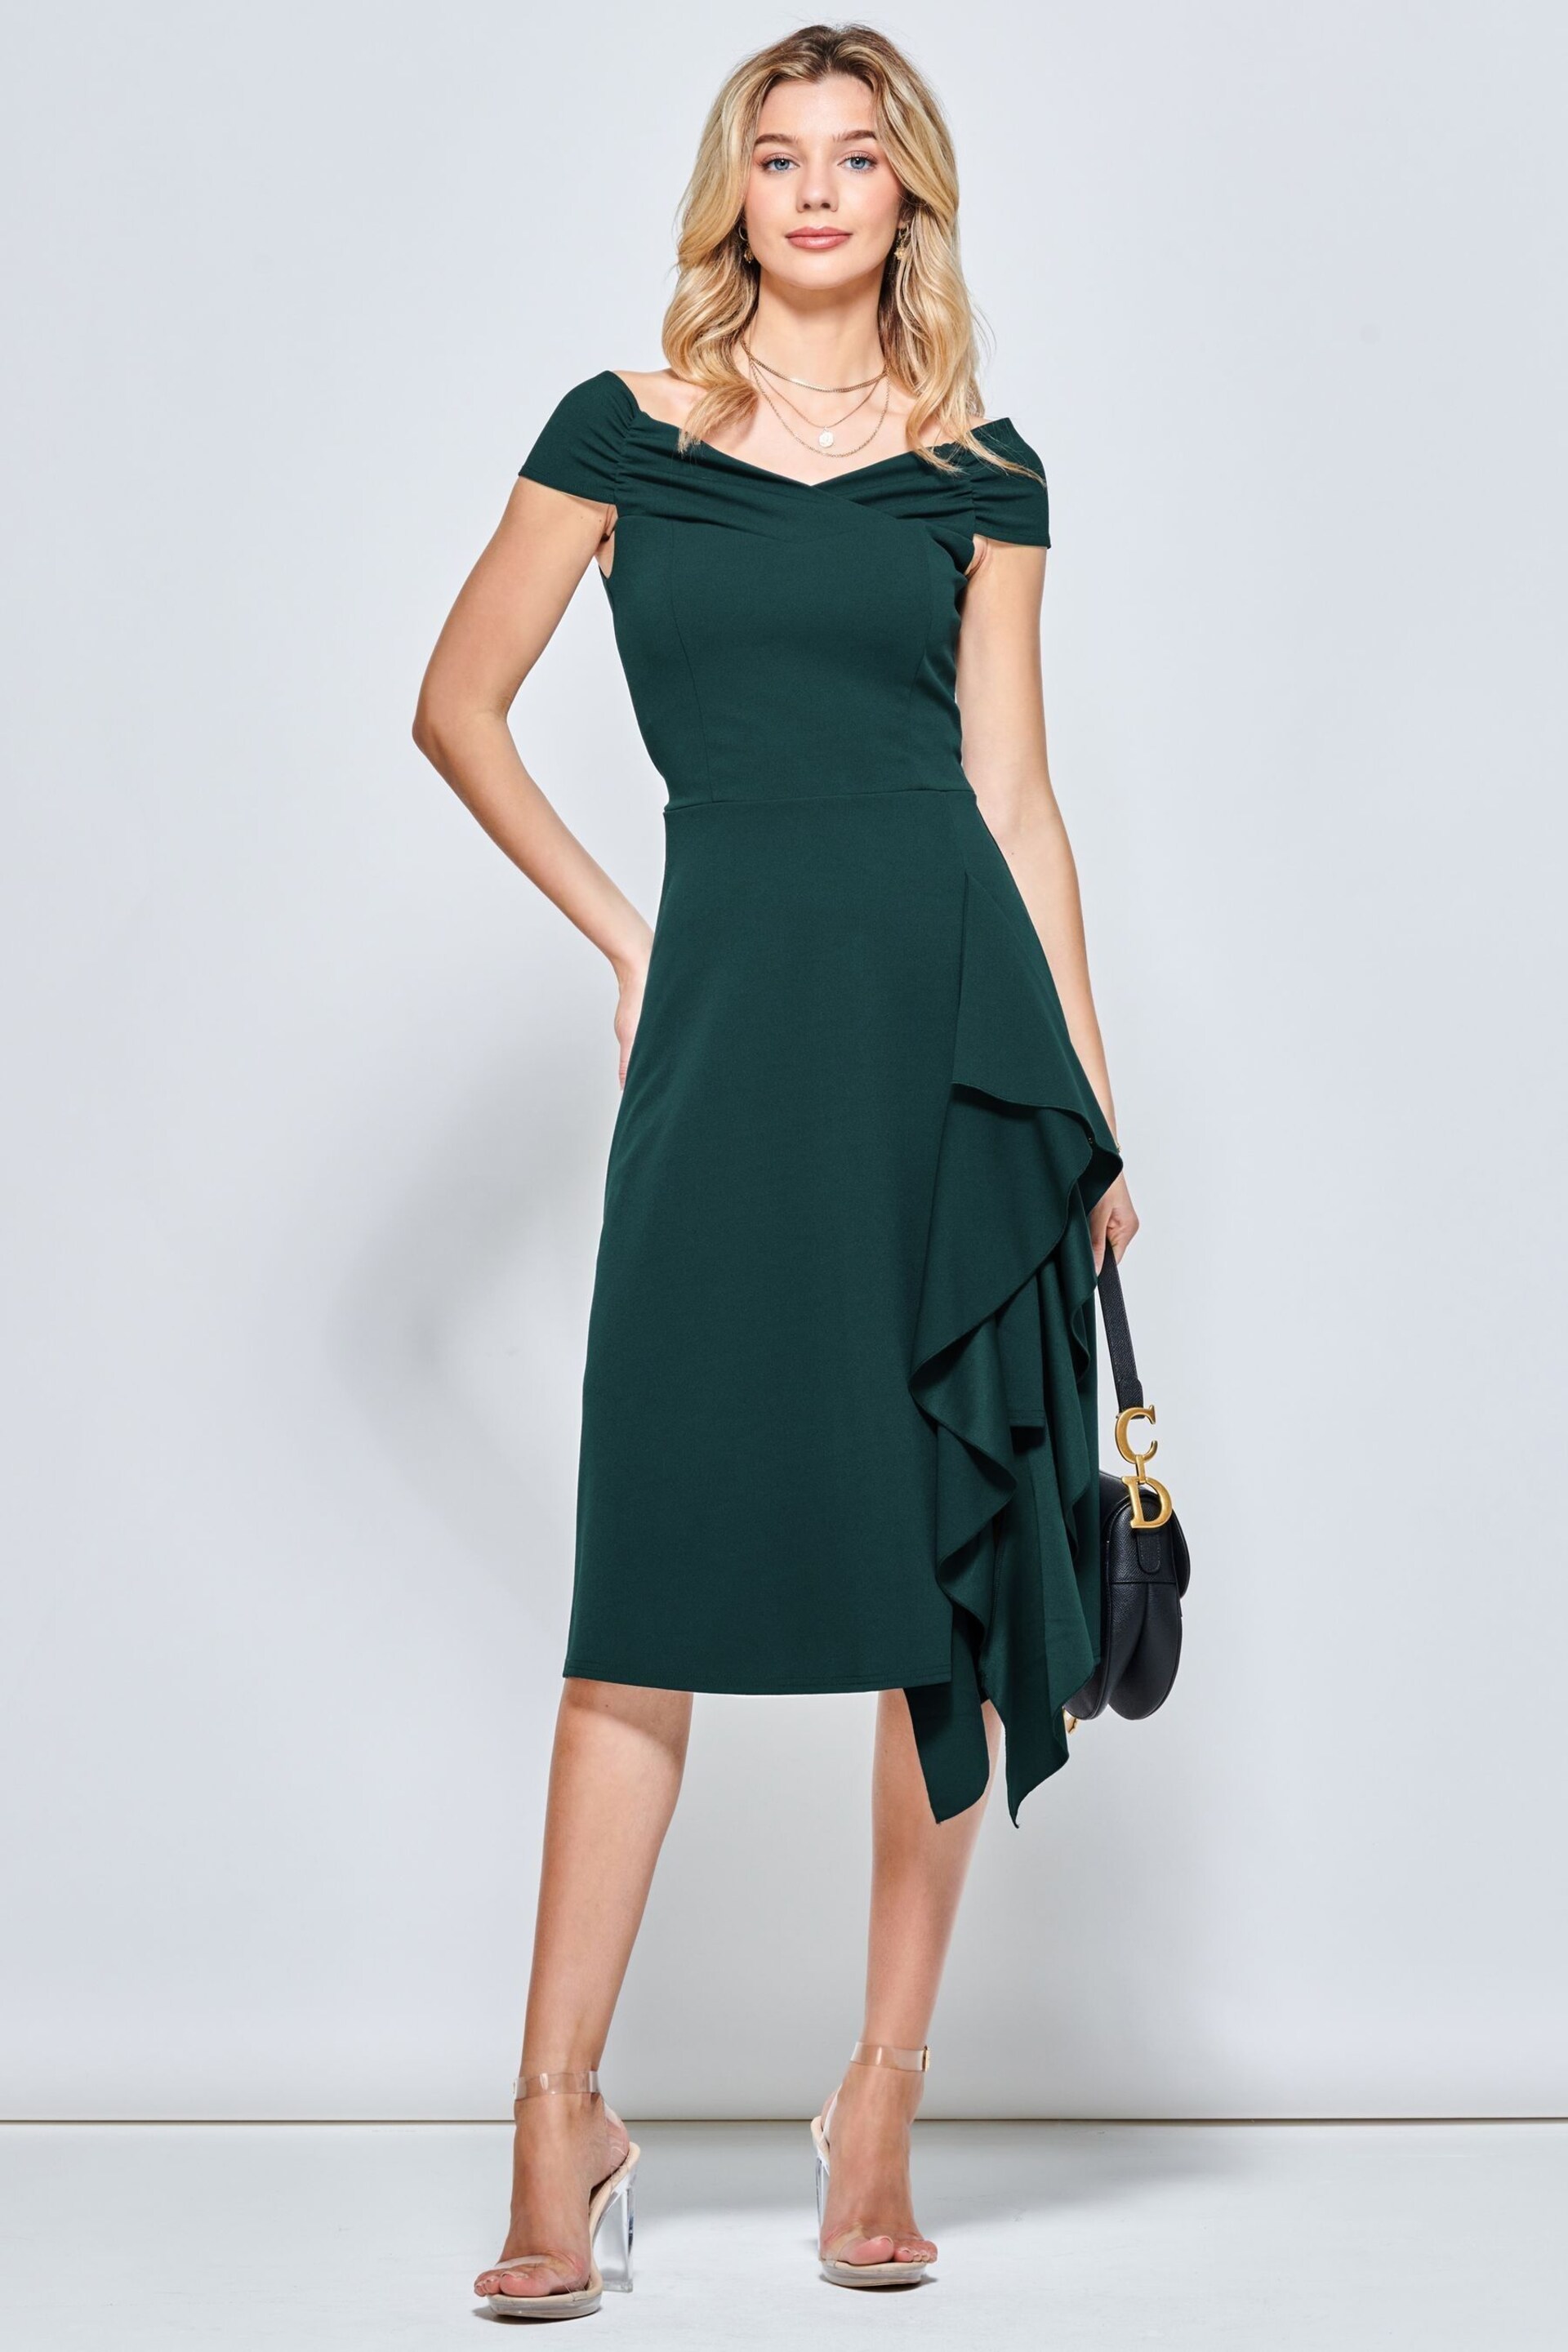 Jolie Moi Green Desiree Frill Fit & Flare Dress - Image 4 of 5